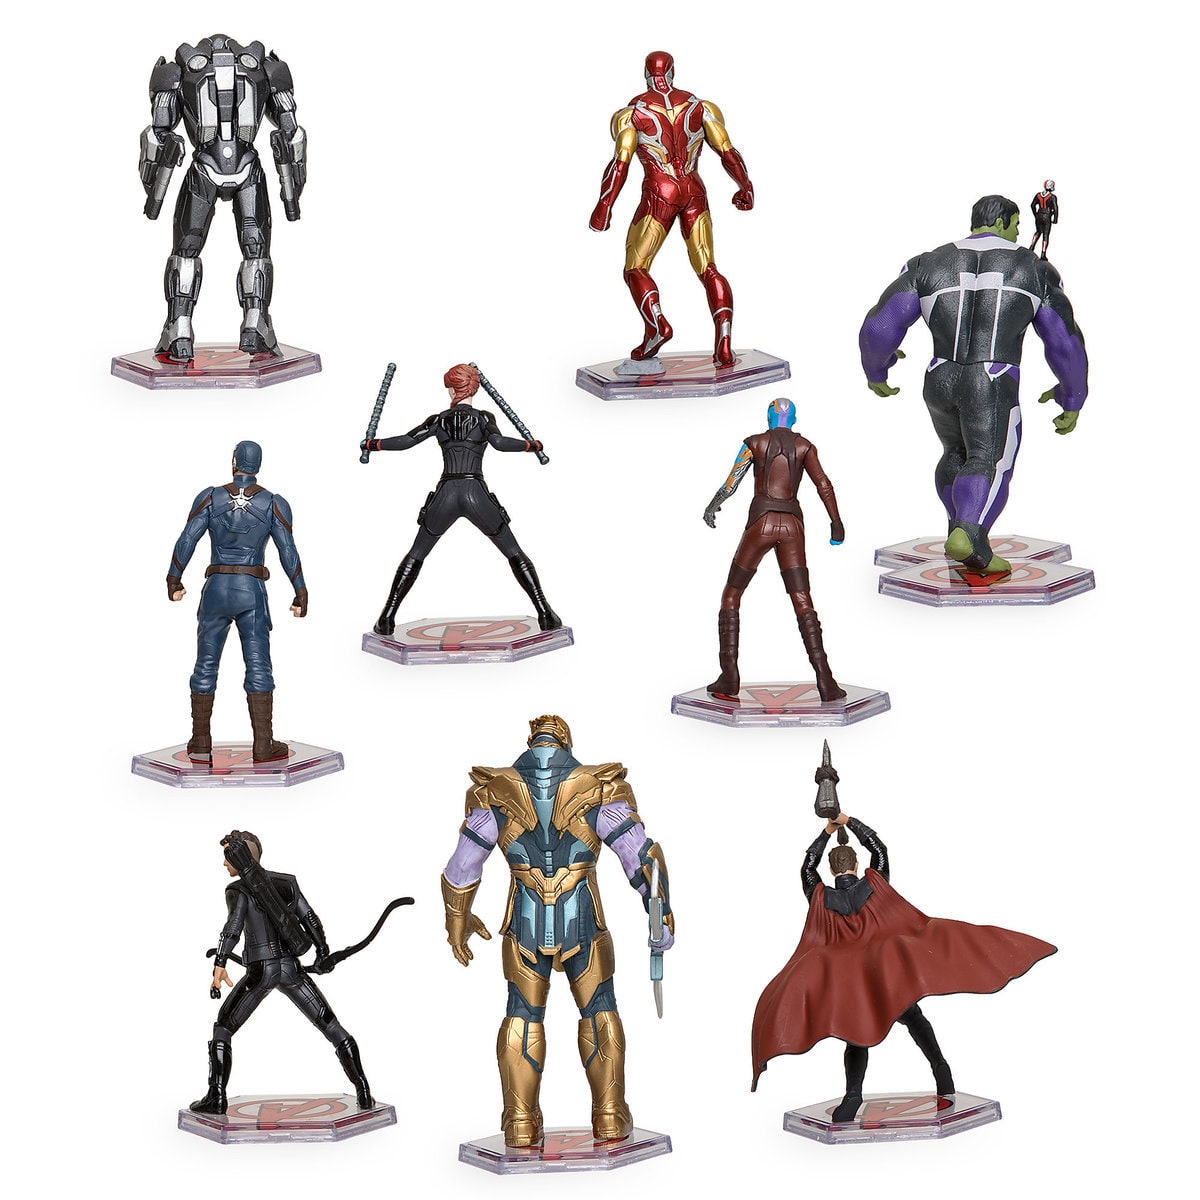 Disney Marvel Avengers End Game Deluxe Figure Play Set Playset Cake Topper New